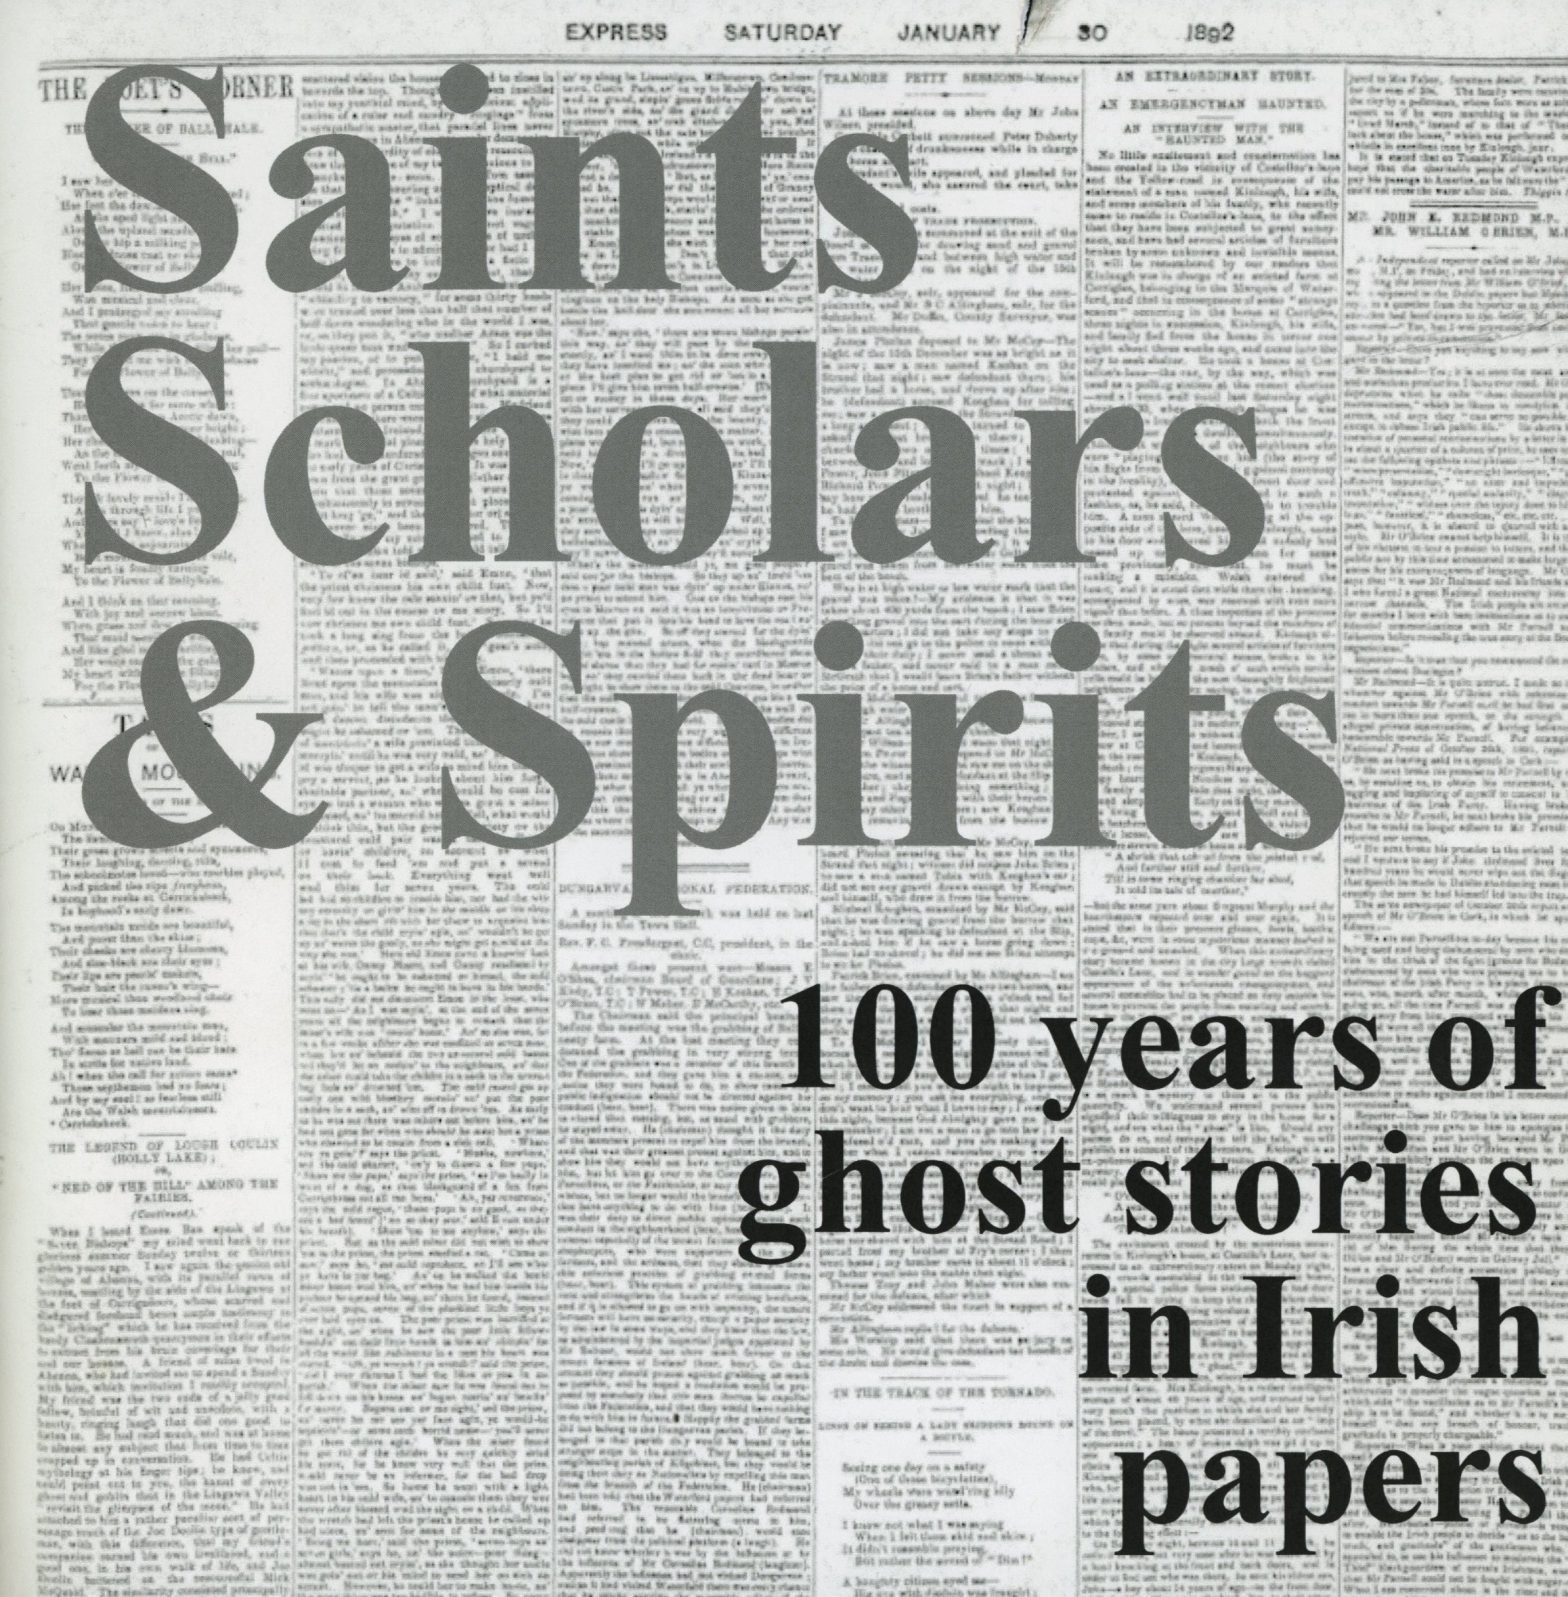 Saints, Scholars & Spirits: 100 years of ghost stories in Irish papers Self-Published